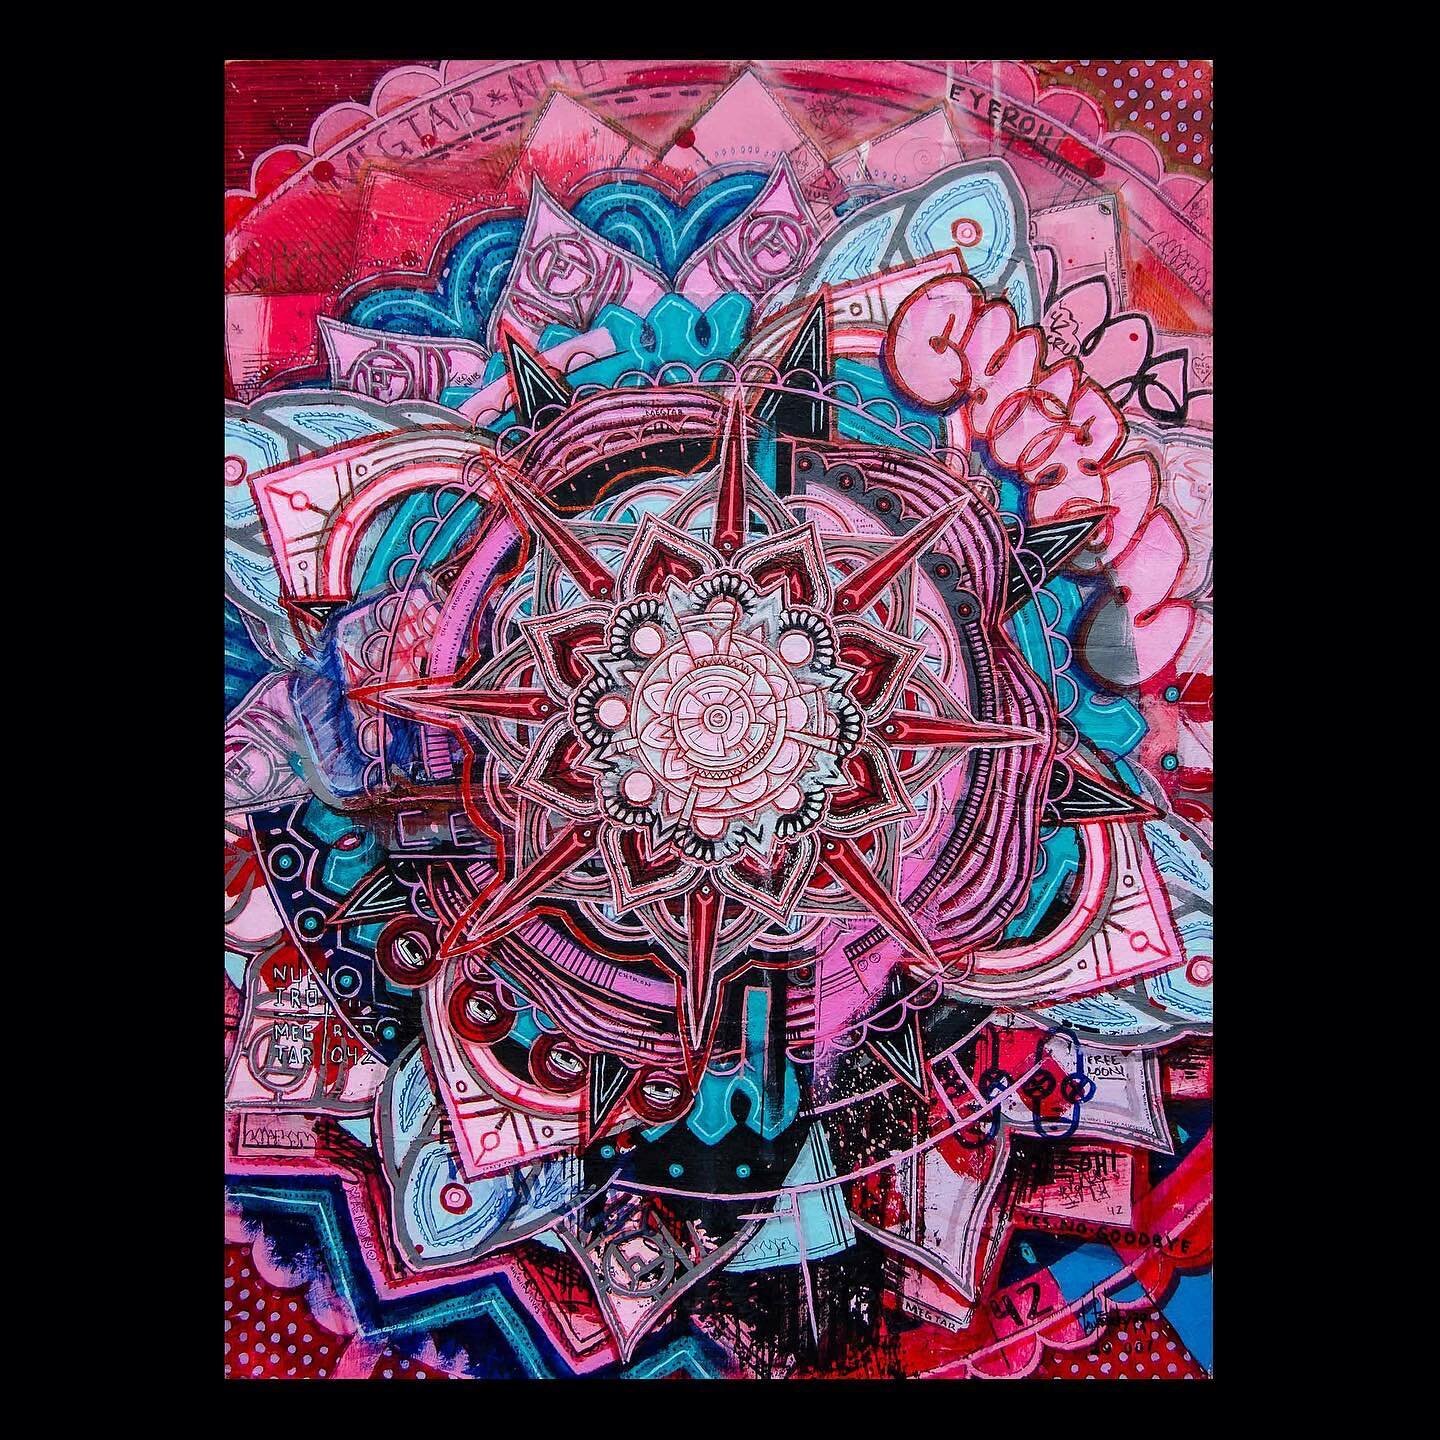 Hyper focused on minuscule details. This one&rsquo;s from 2020 I think, or 2021. I don&rsquo;t know, I don&rsquo;t really understand time any more&hellip; #TheSimulationIsBroken 
&bull;
&bull;
&bull;
#artist #painting #visionaryartist #visionaryart #